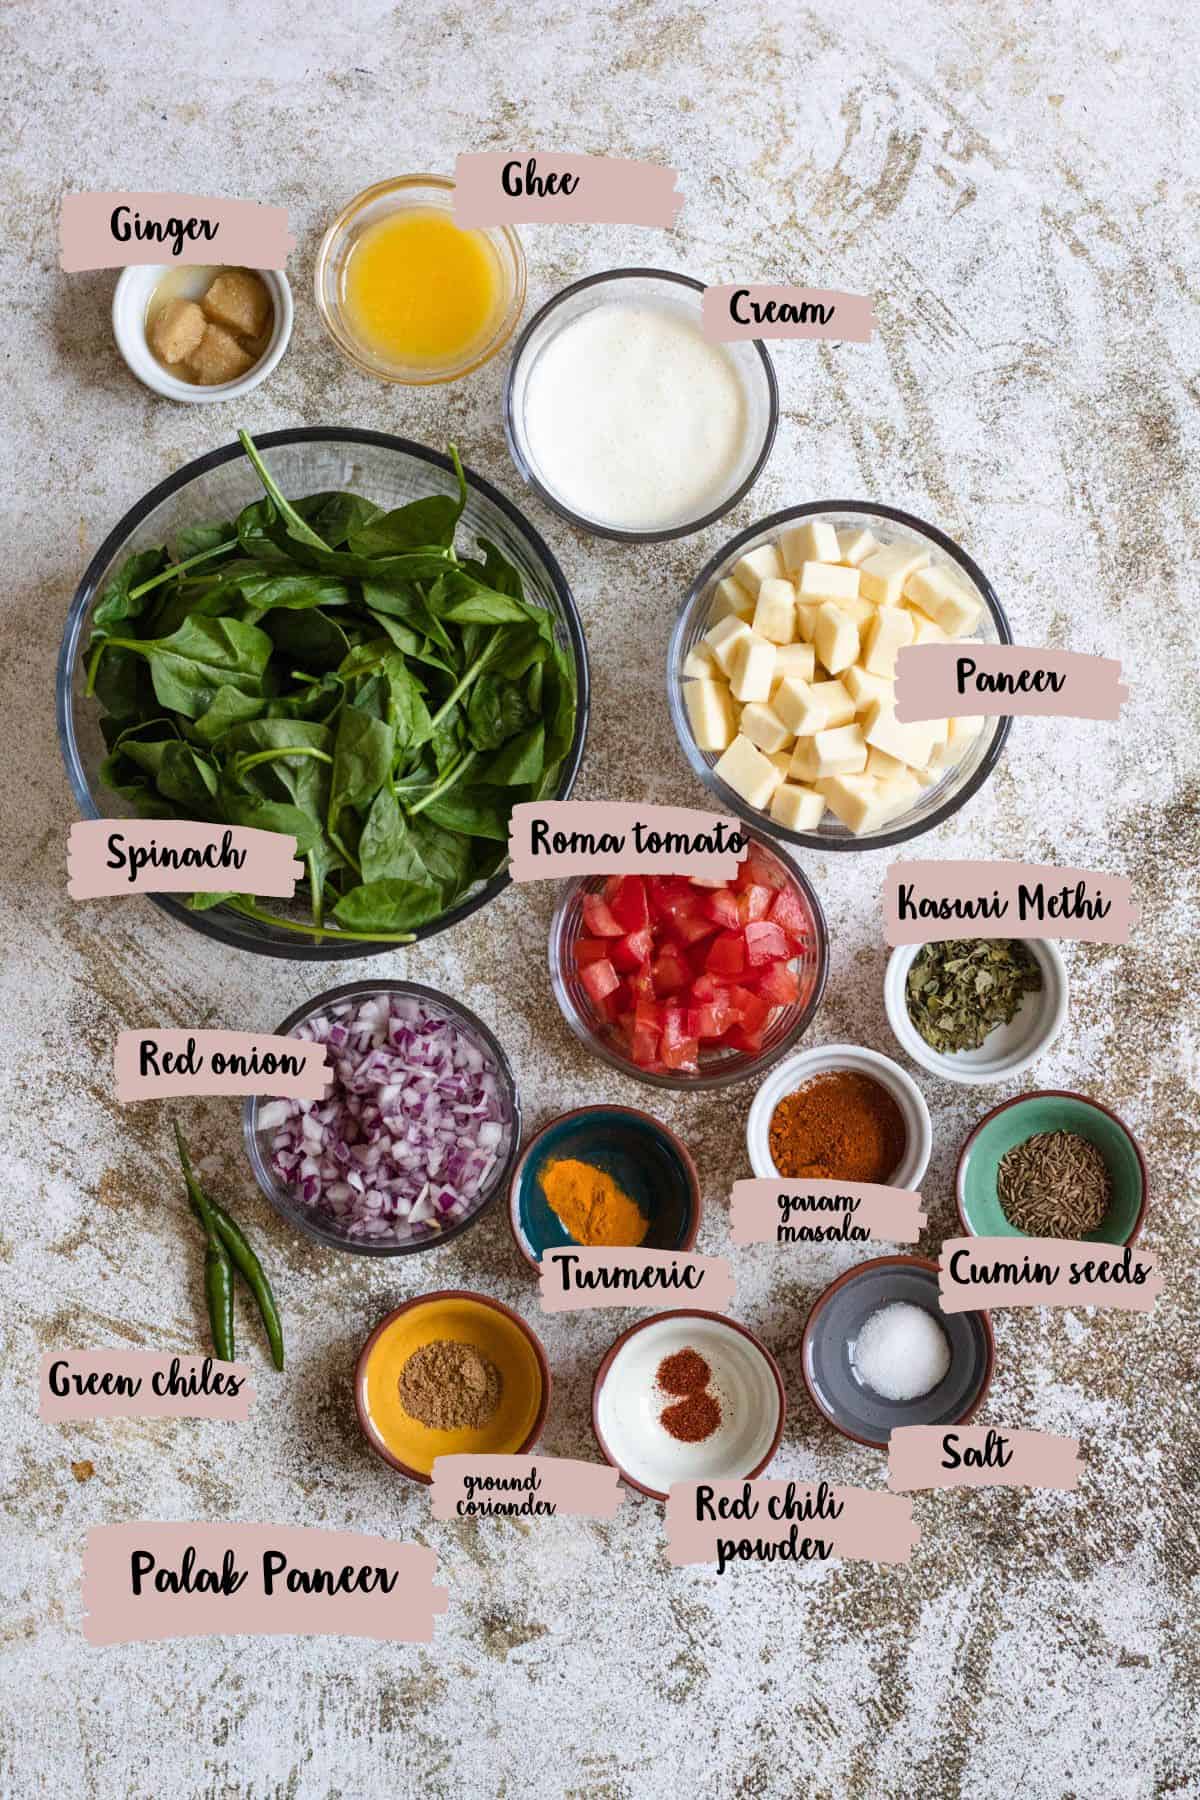 Ingredients shown are used to make easy palak paneer recipe. 